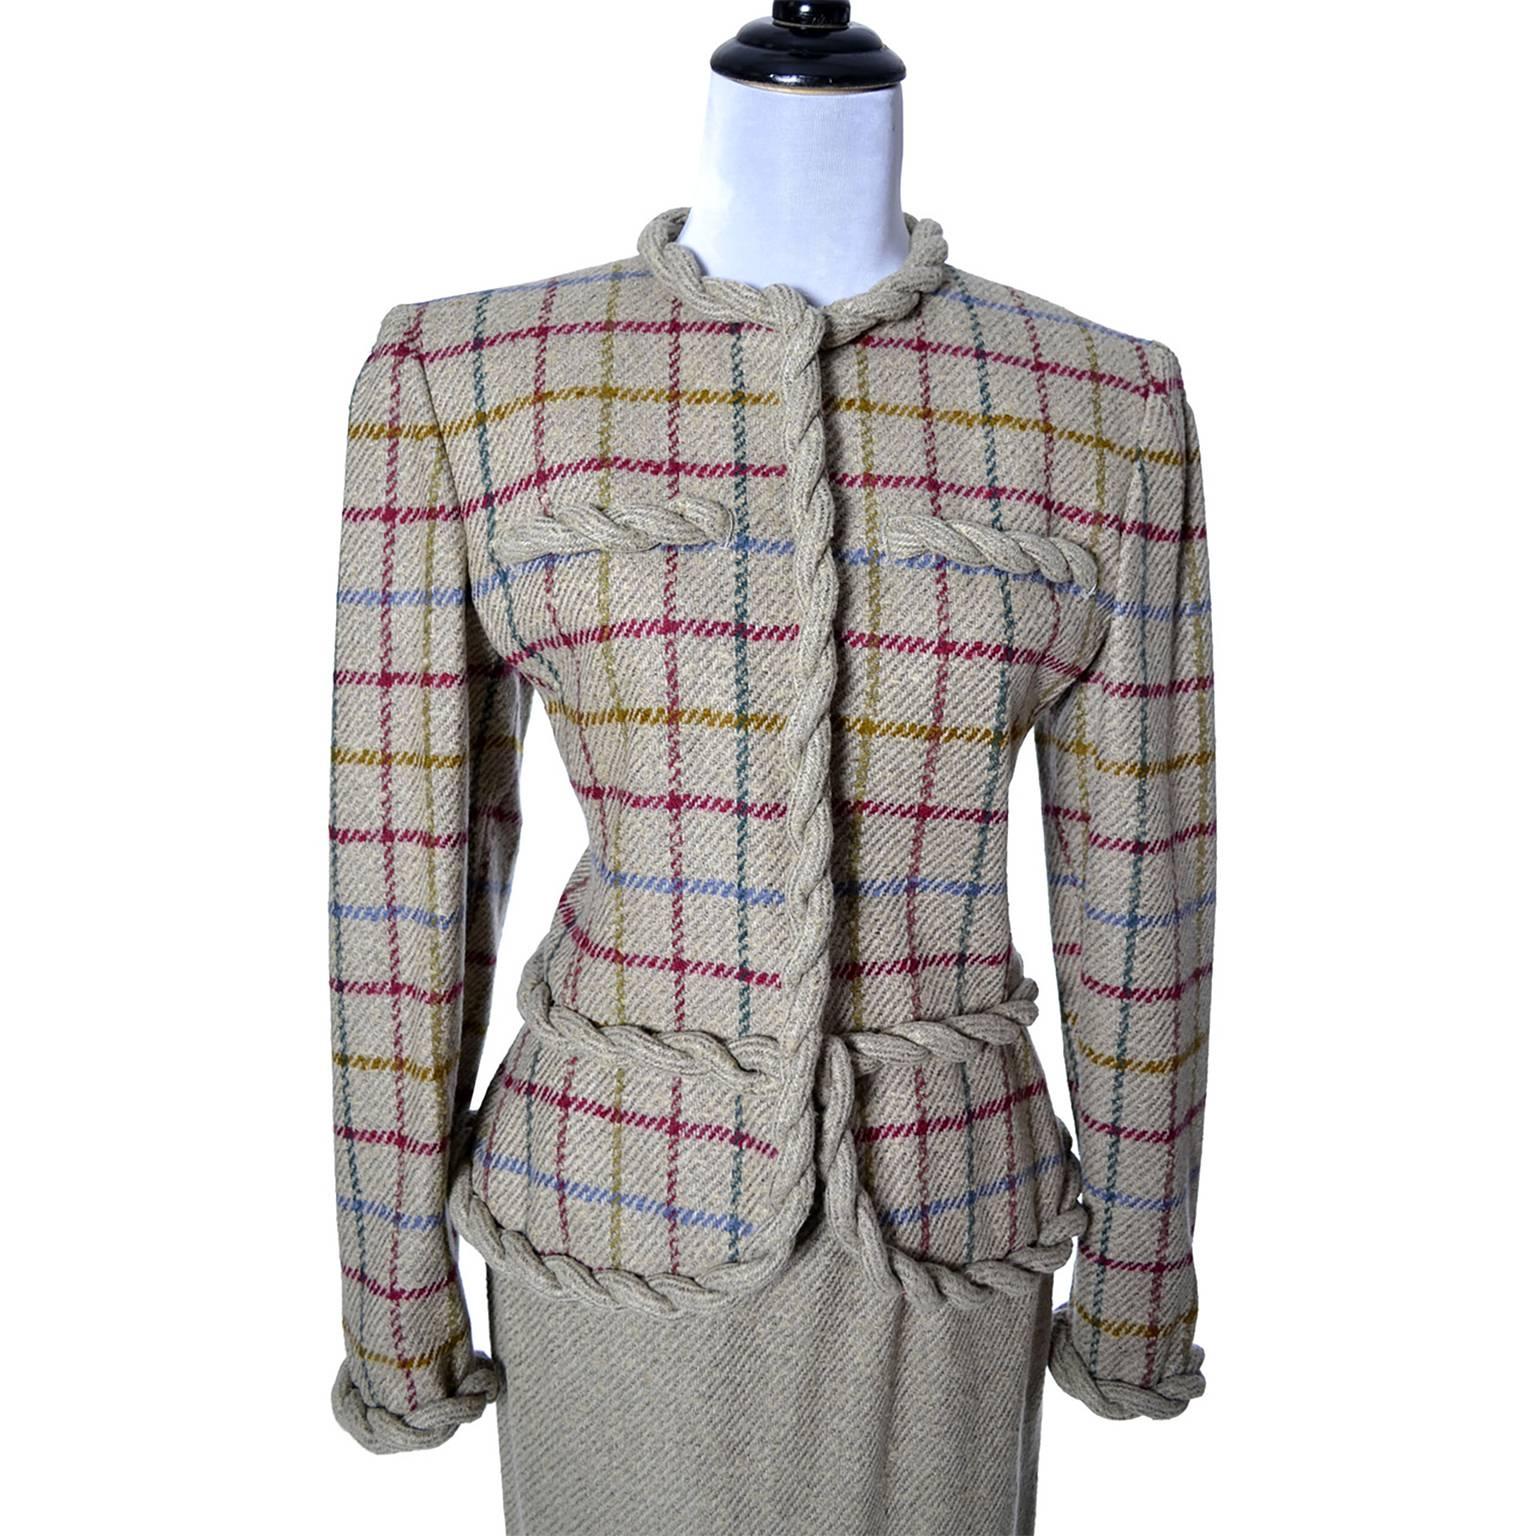 This is a beautiful vintage Valentino 2 piece suit with slim skirt and fitted blazer with shoulder pads. This suit includes a pale taupe heathered tweed wool skirt with coordinating windowpane plaid blazer in taupe, burgundy, gold and blue with